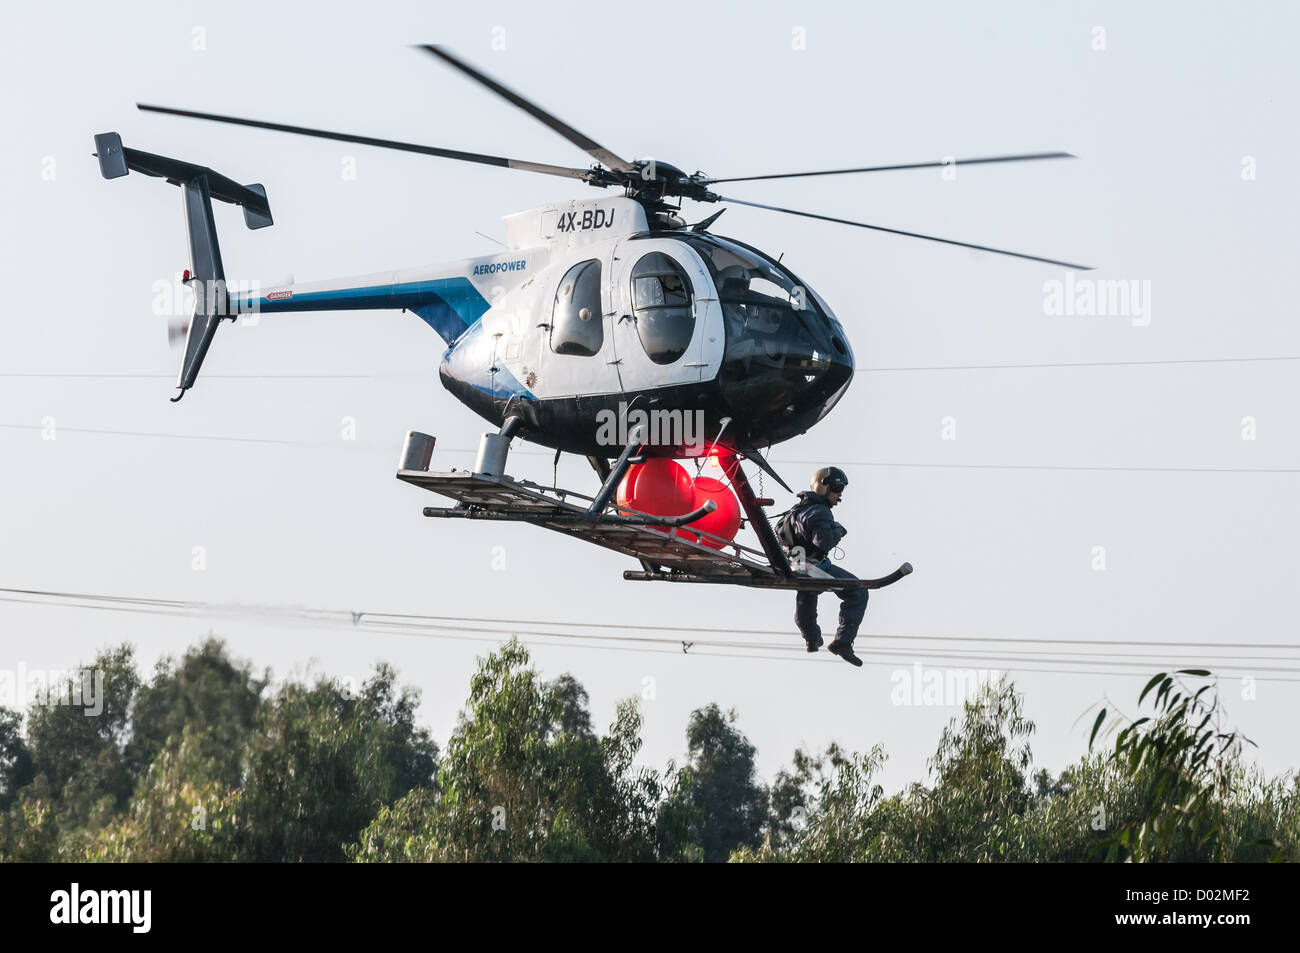 Hughes MD 500E Civilian Helicopter. Photographed in Israel Stock Photo